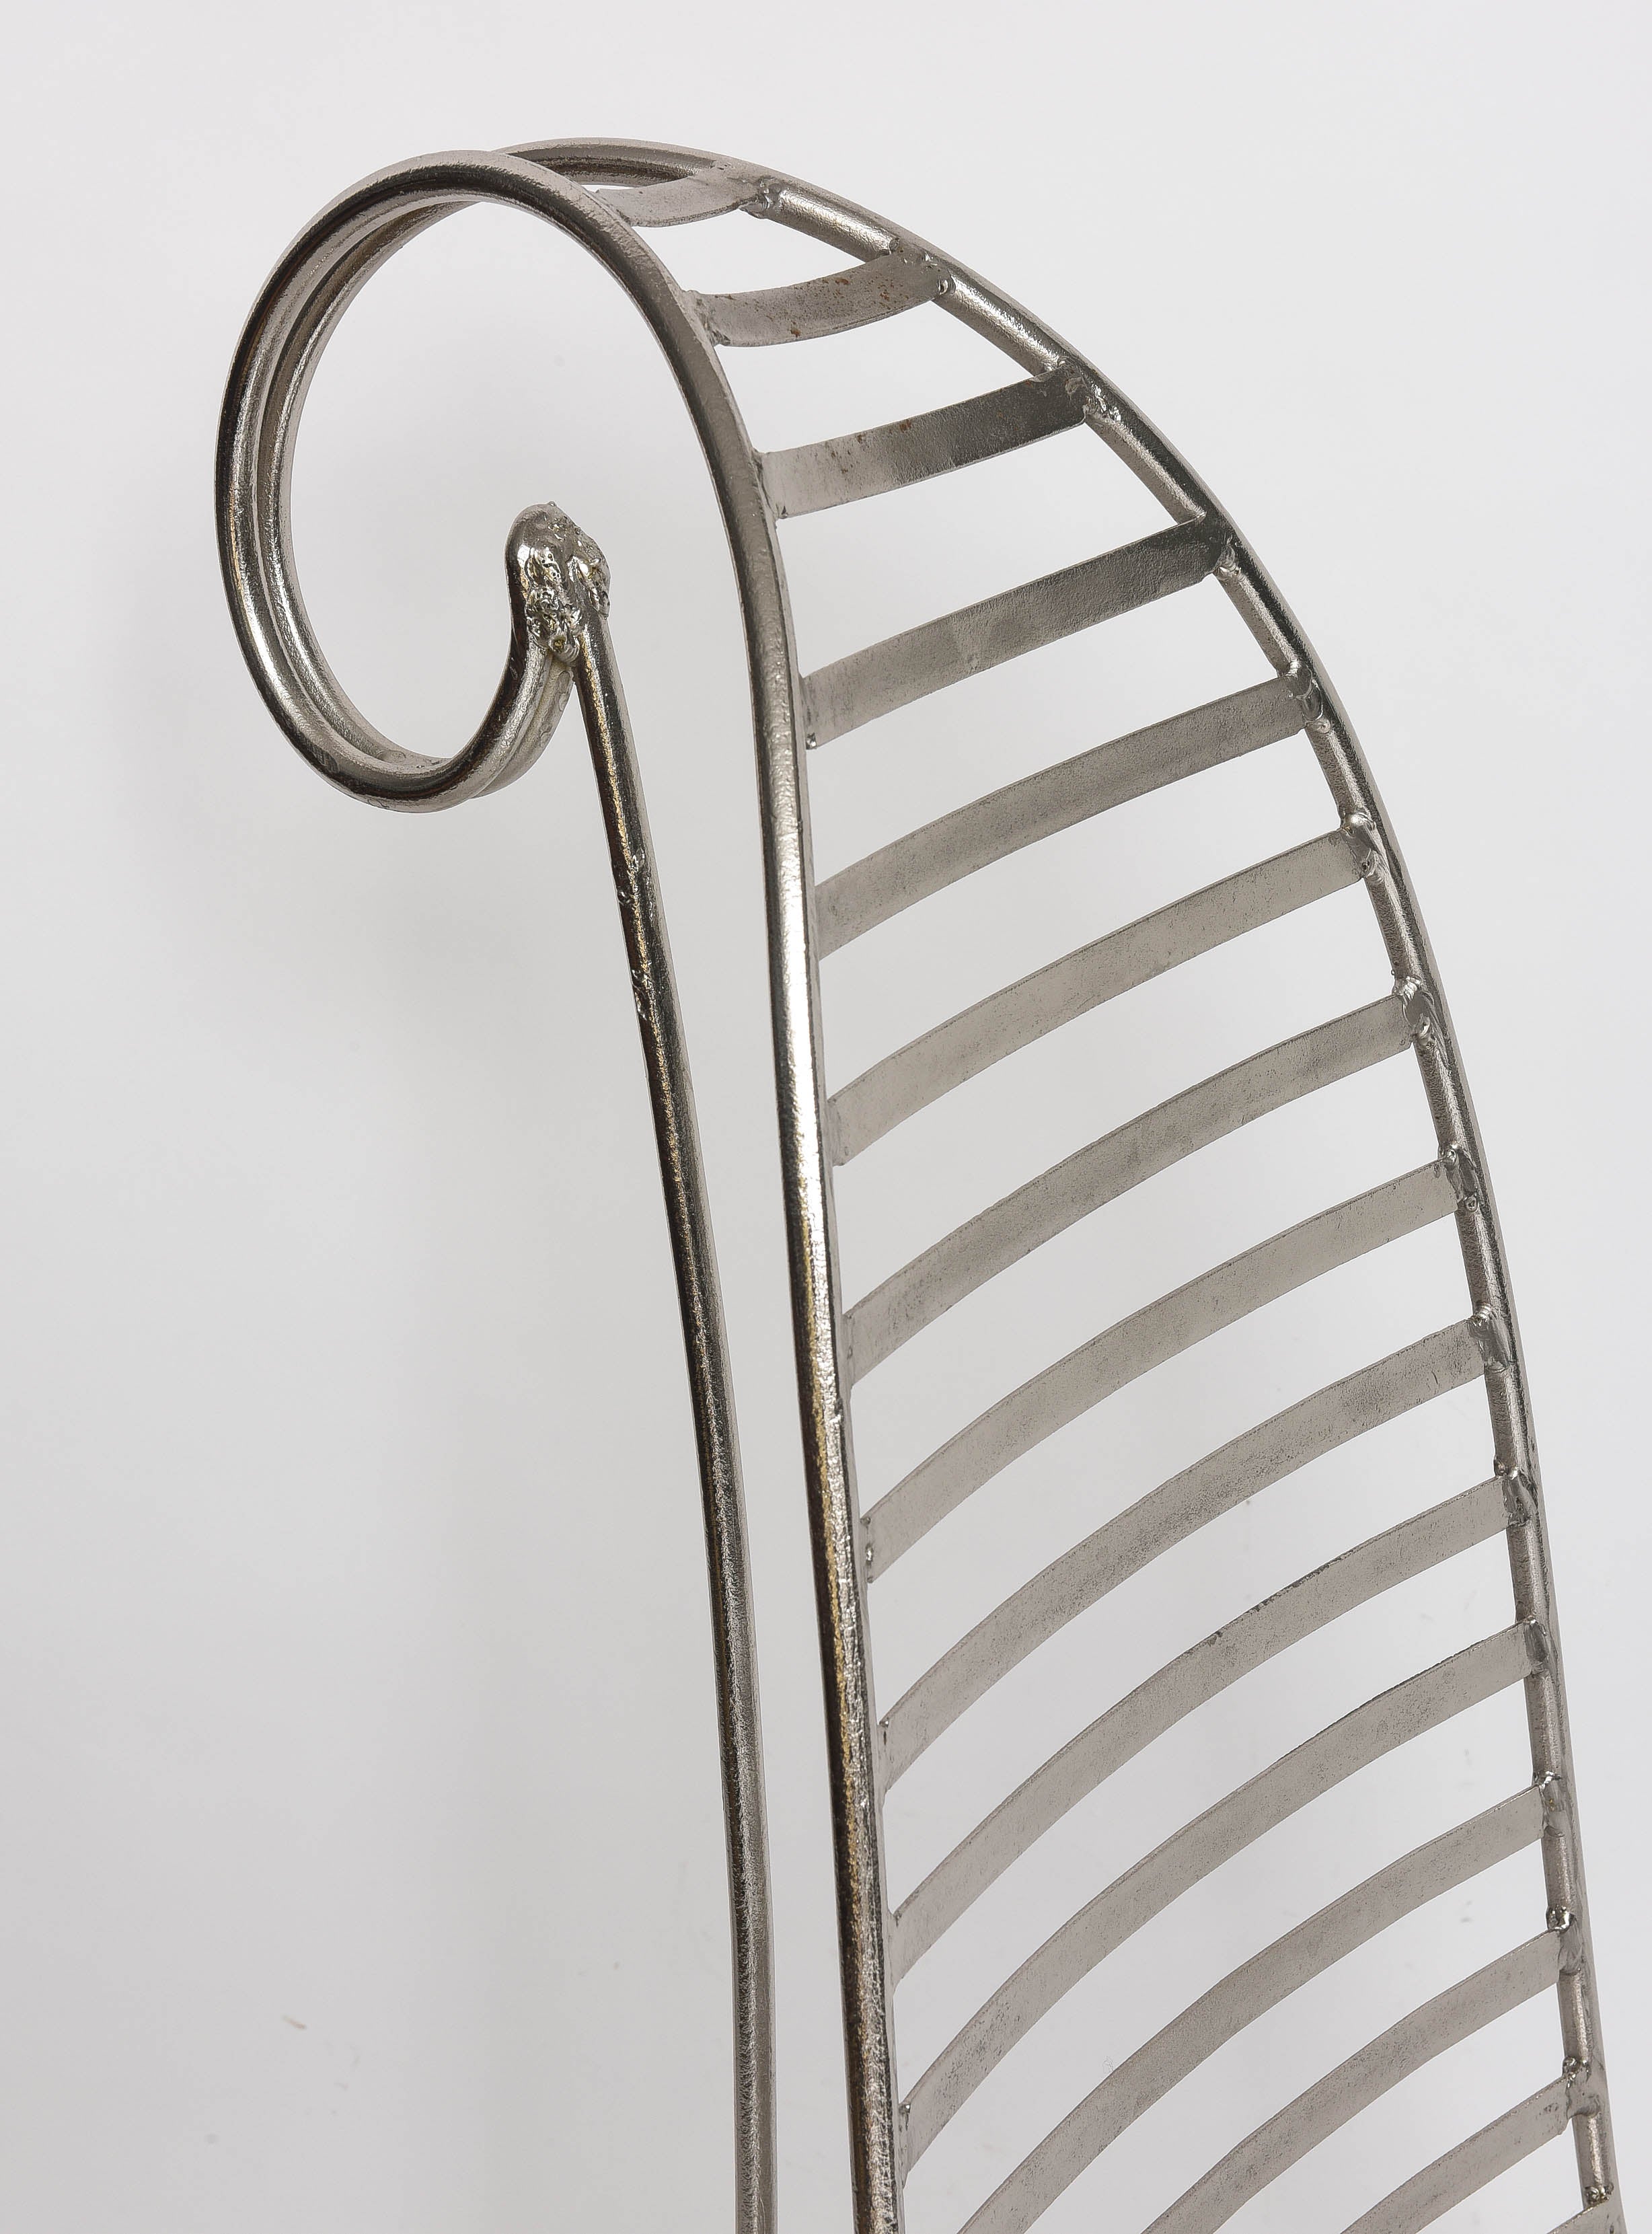 This attractive chromed version of the iconic spine chair by a follower of André Dubreuil was acquired in Miami in the 1990s.